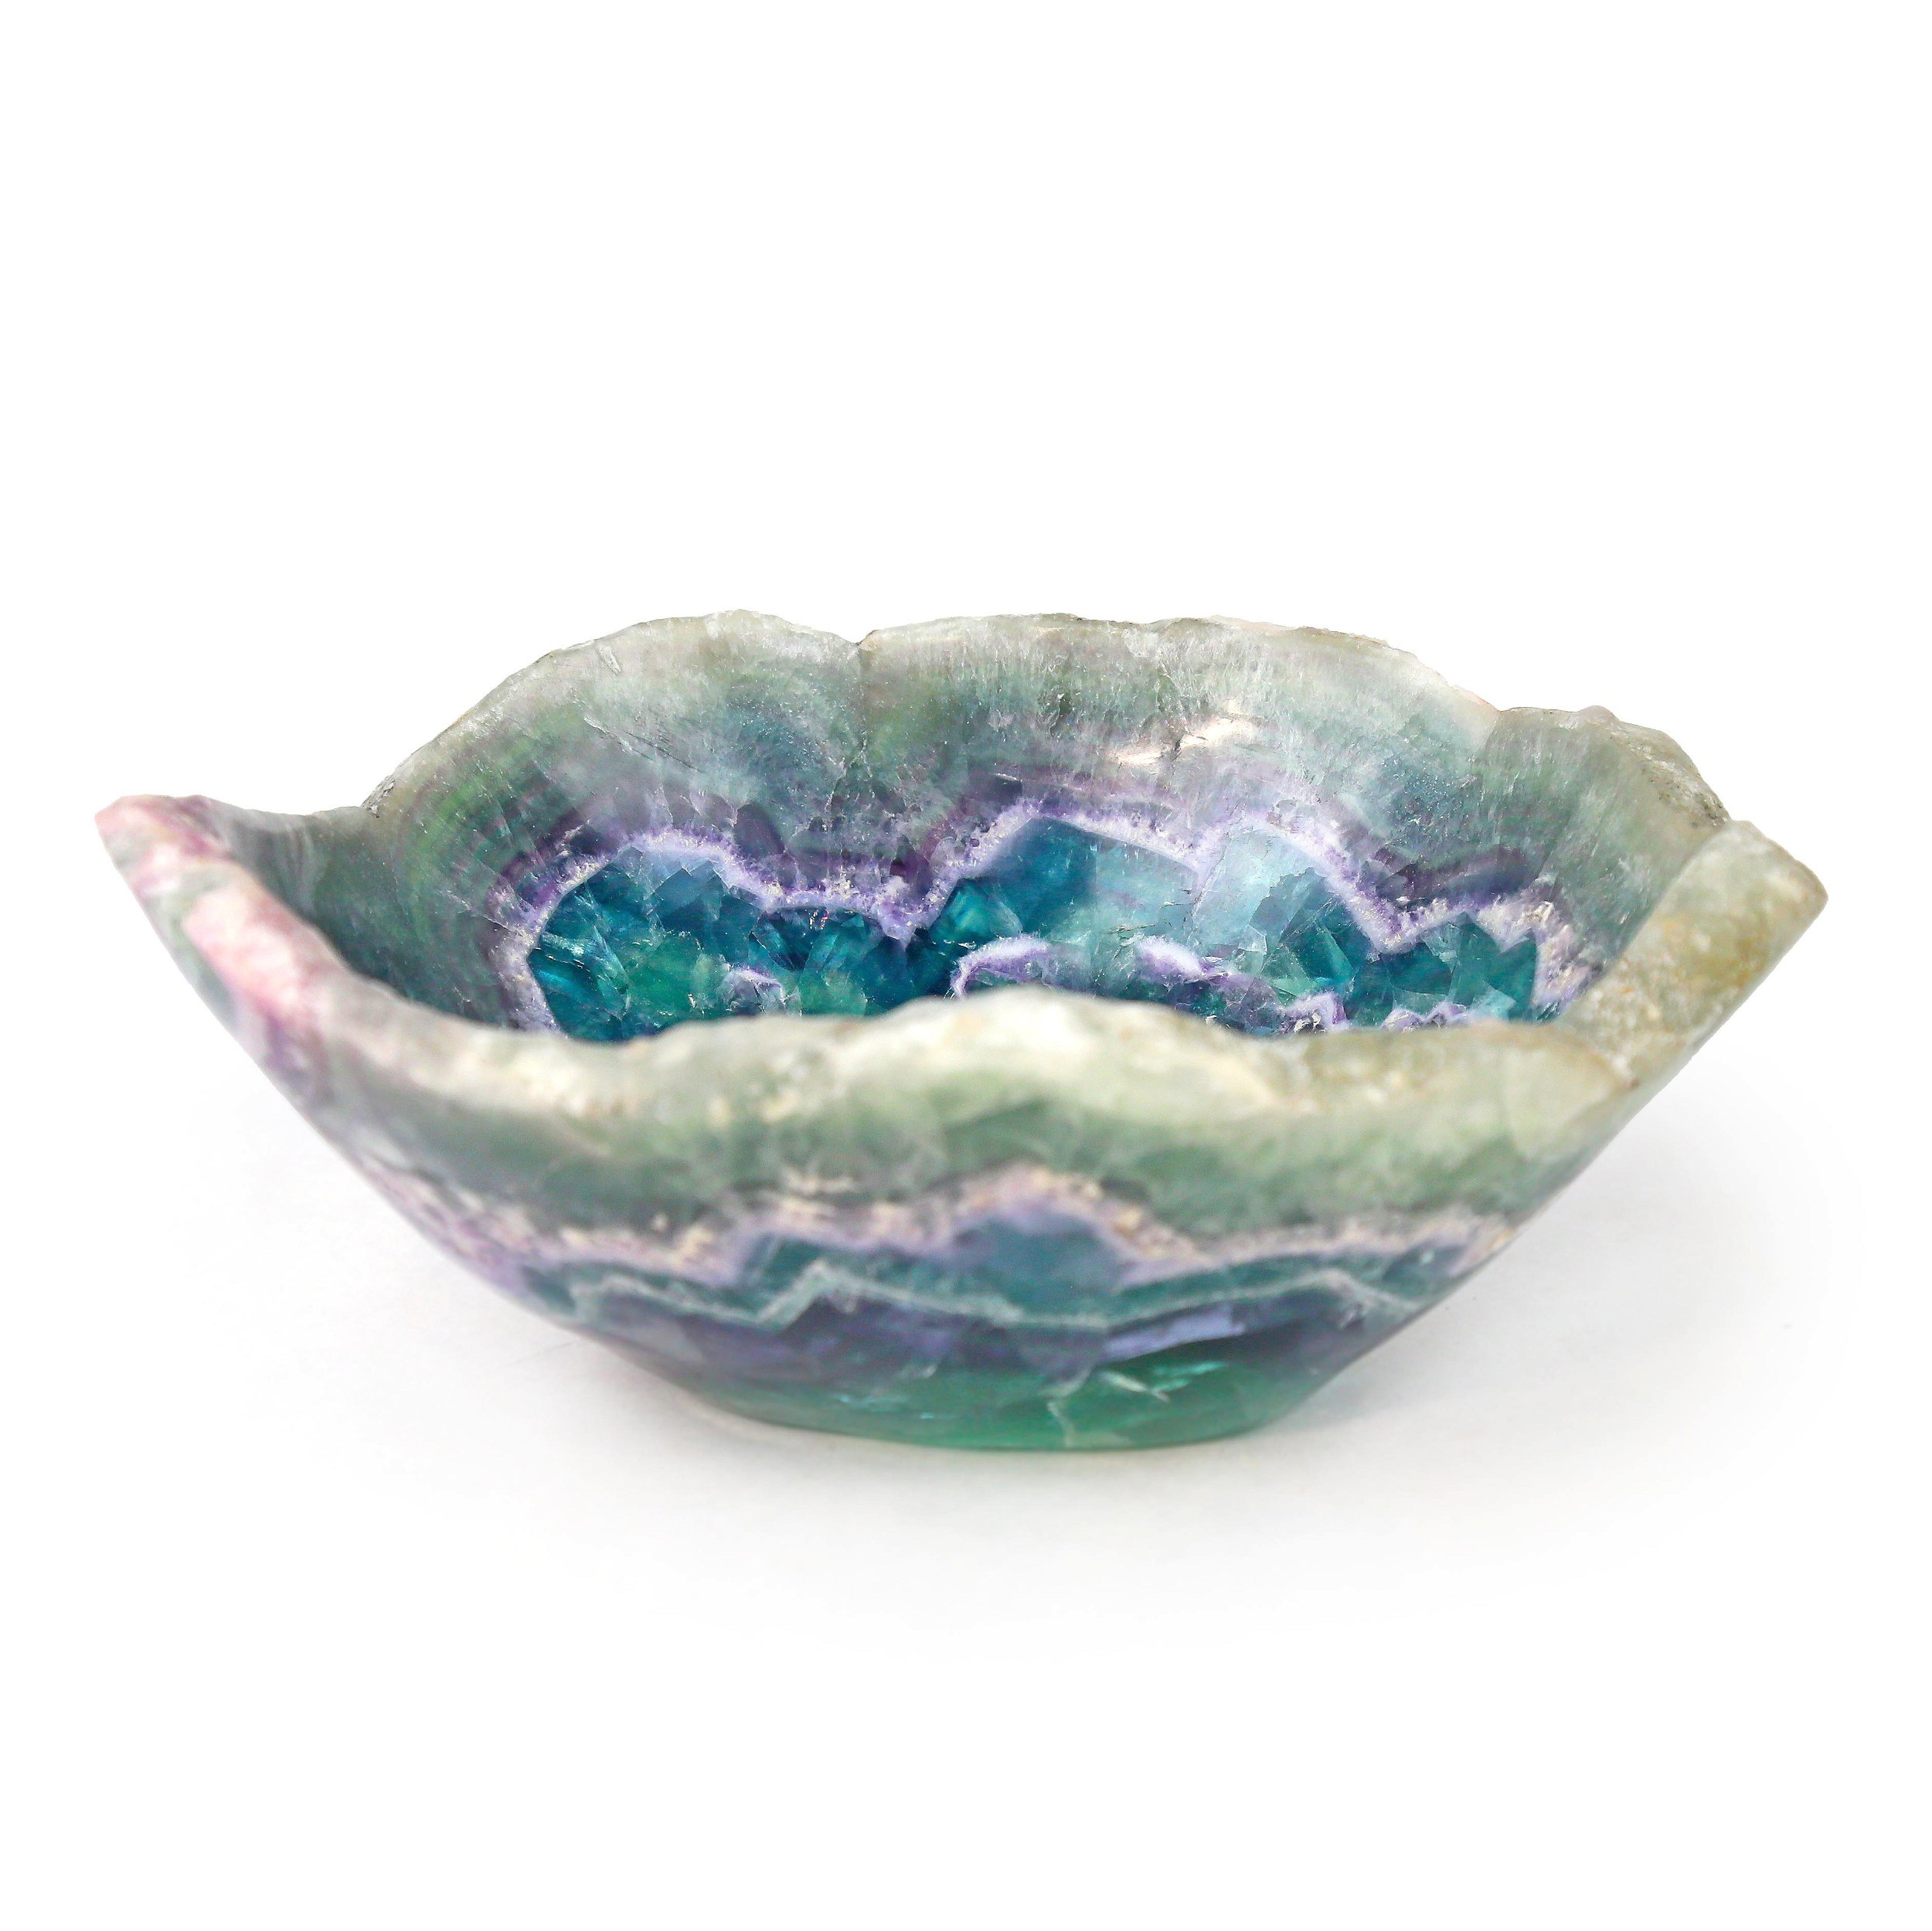 Fluorite Vessel with Organic Frosted Edge from Mexico